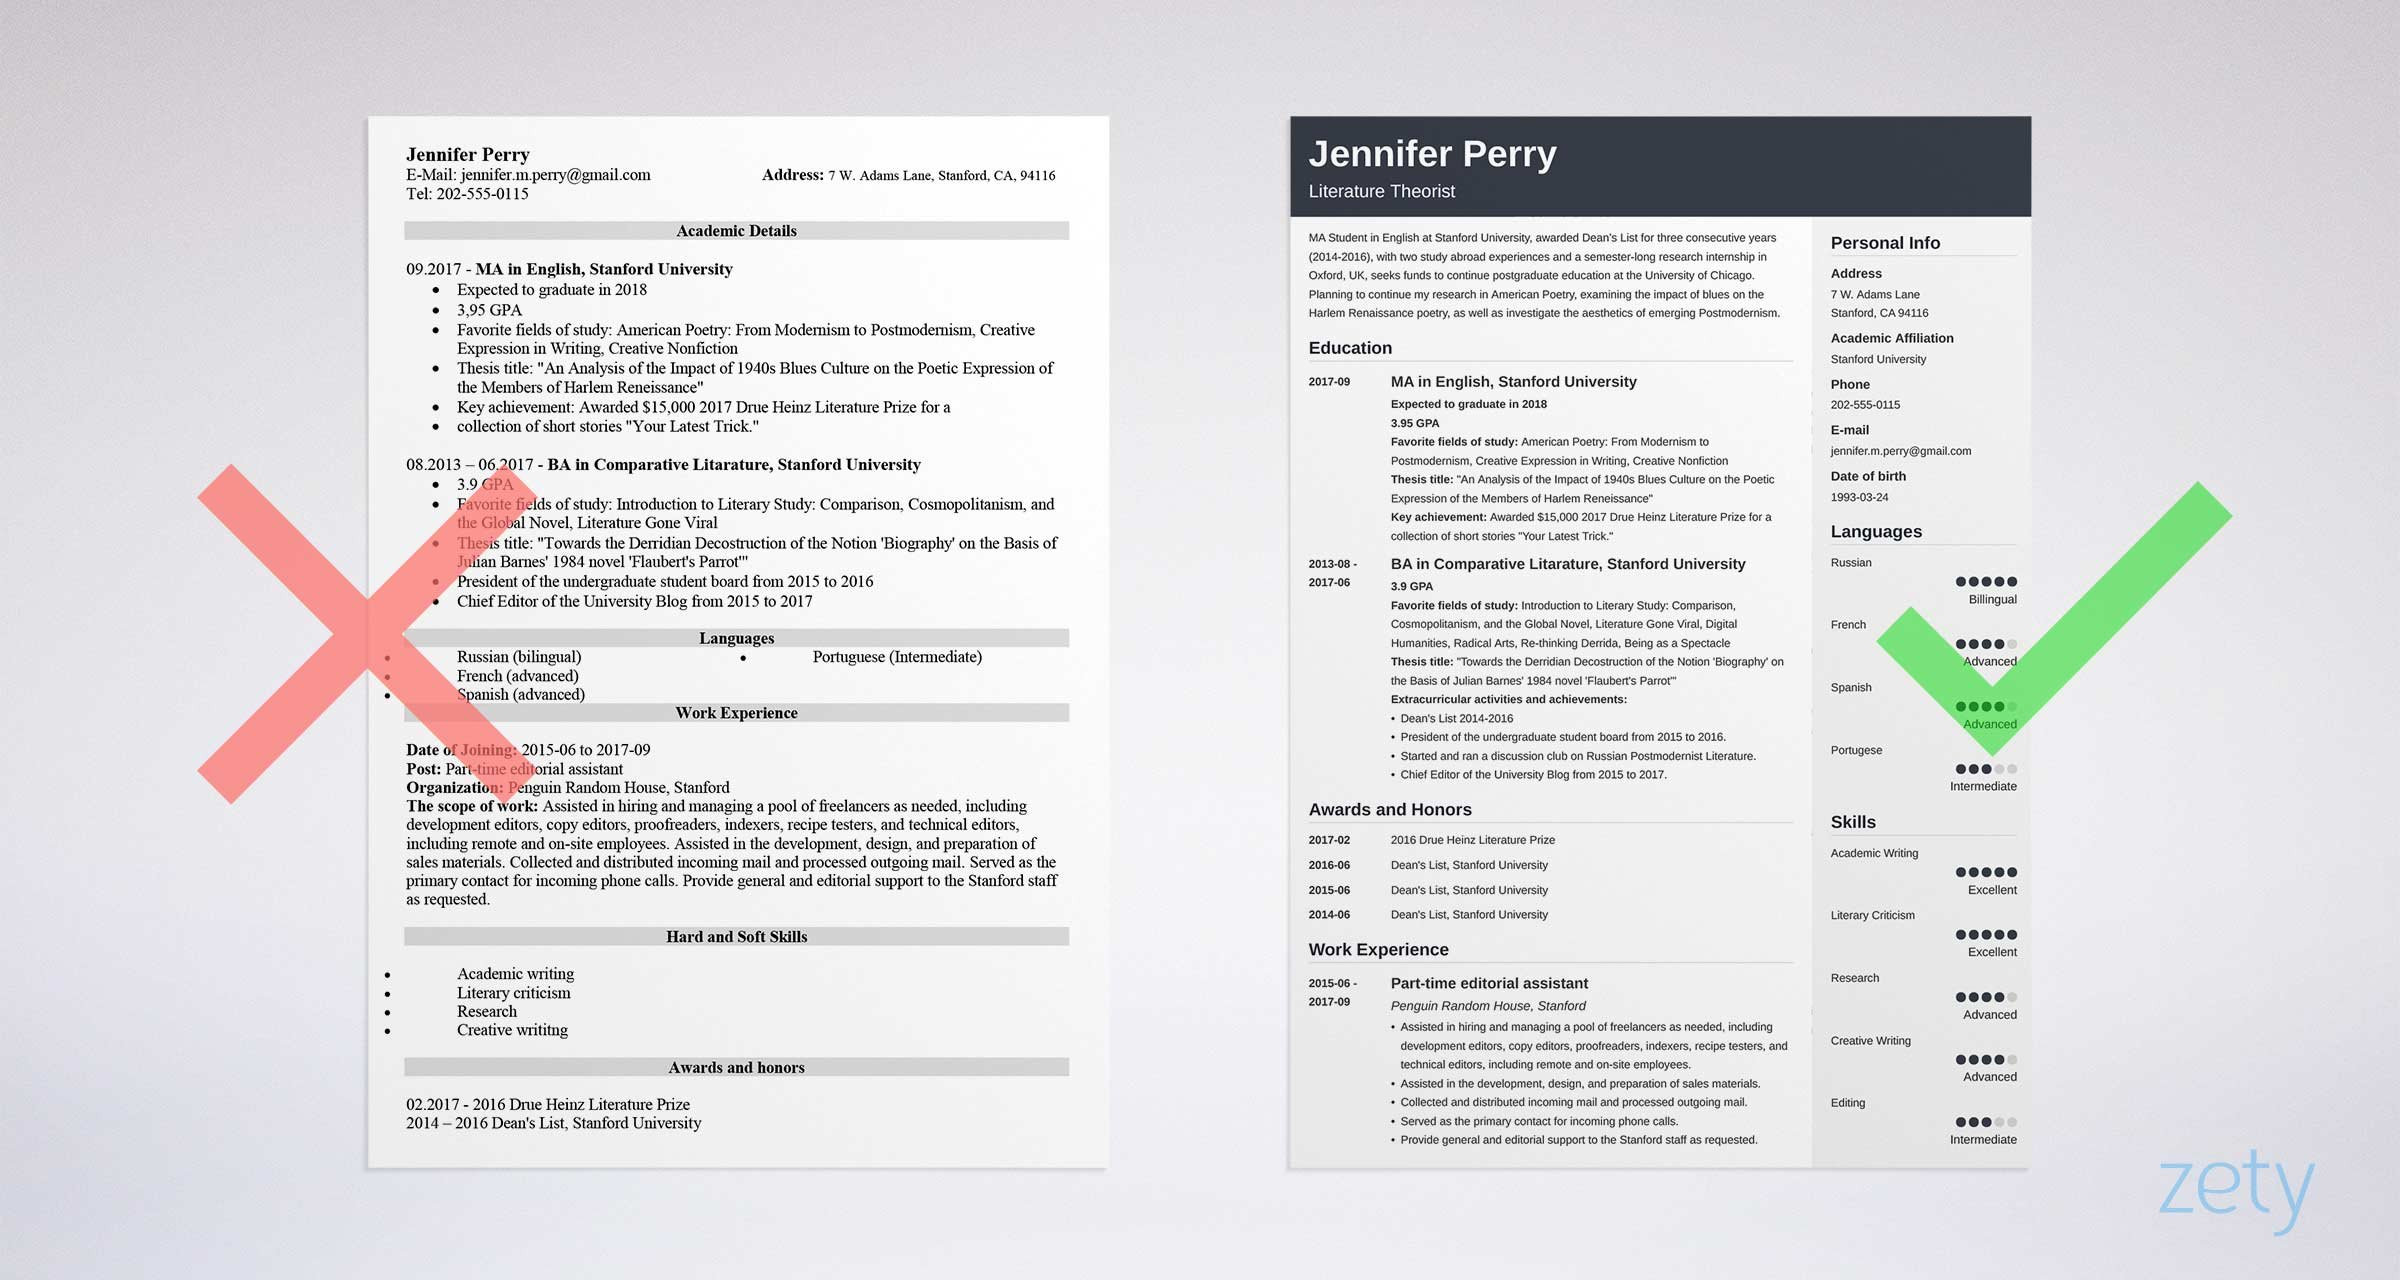 Sample High School Student Resume for Scholarships Scholarship Resume Examples [lancarrezekiqtemplate with Objective]